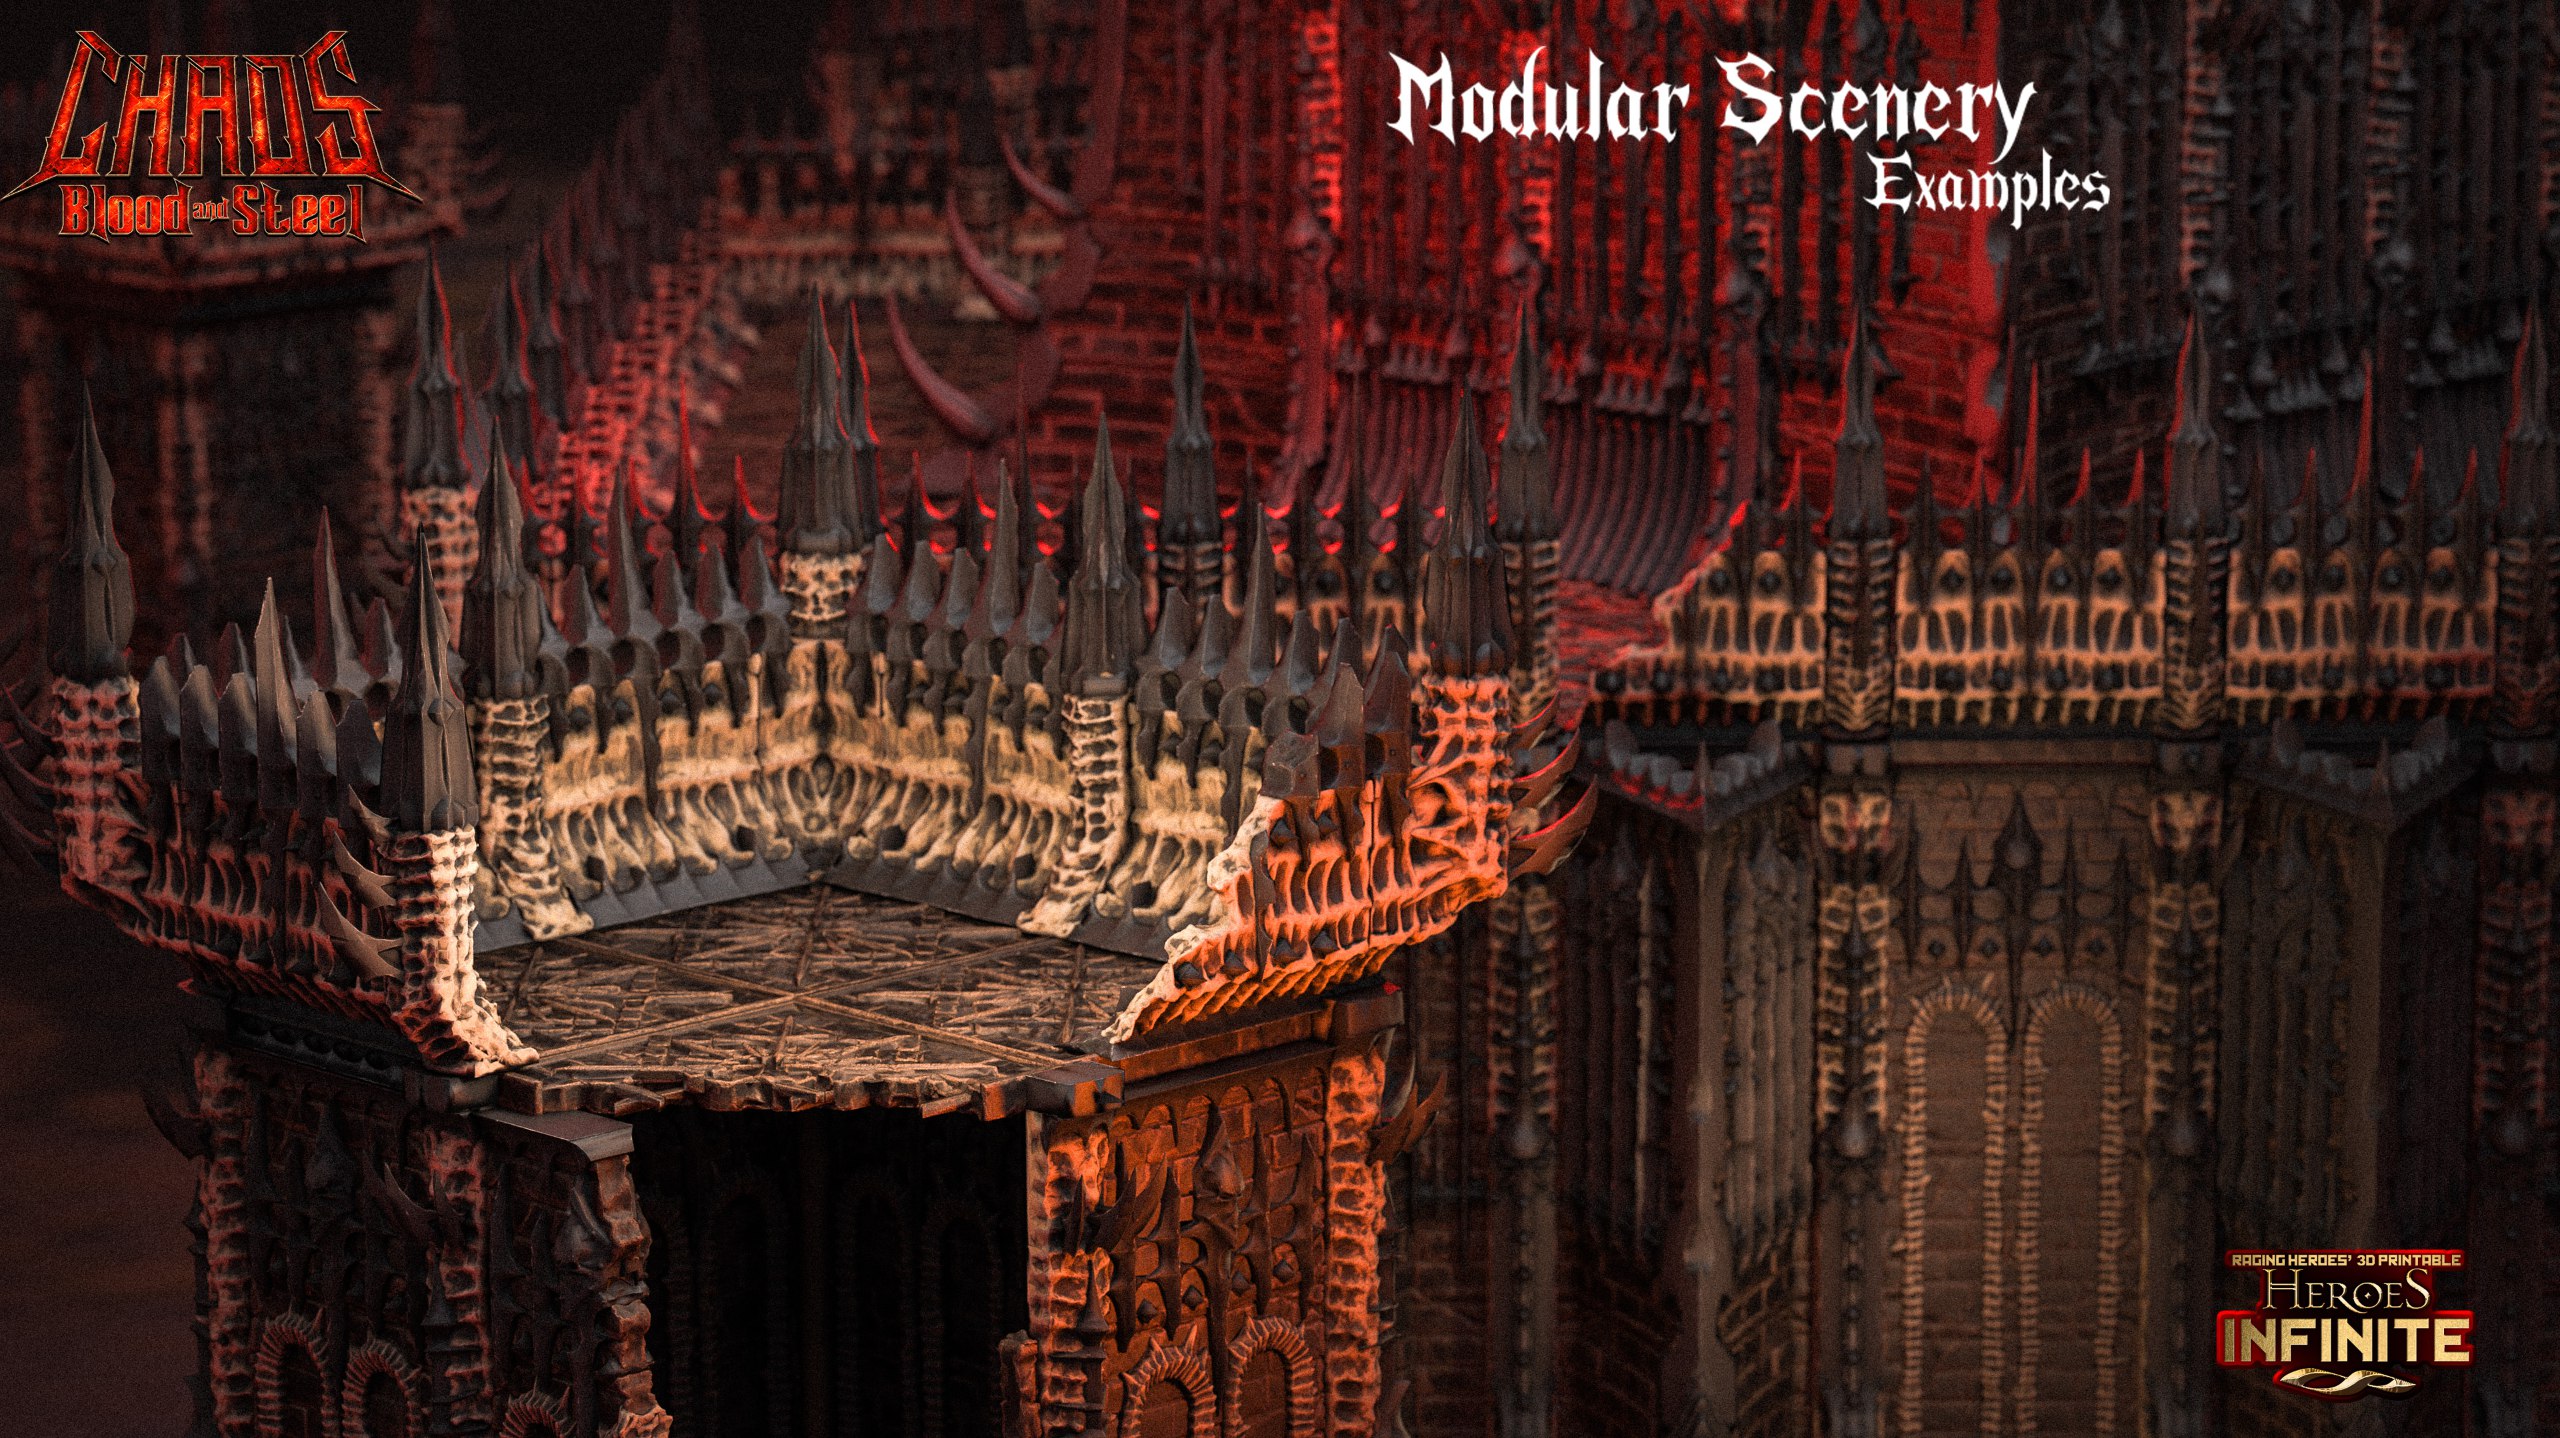 Chaos Blood and Steel — Modular Scenery